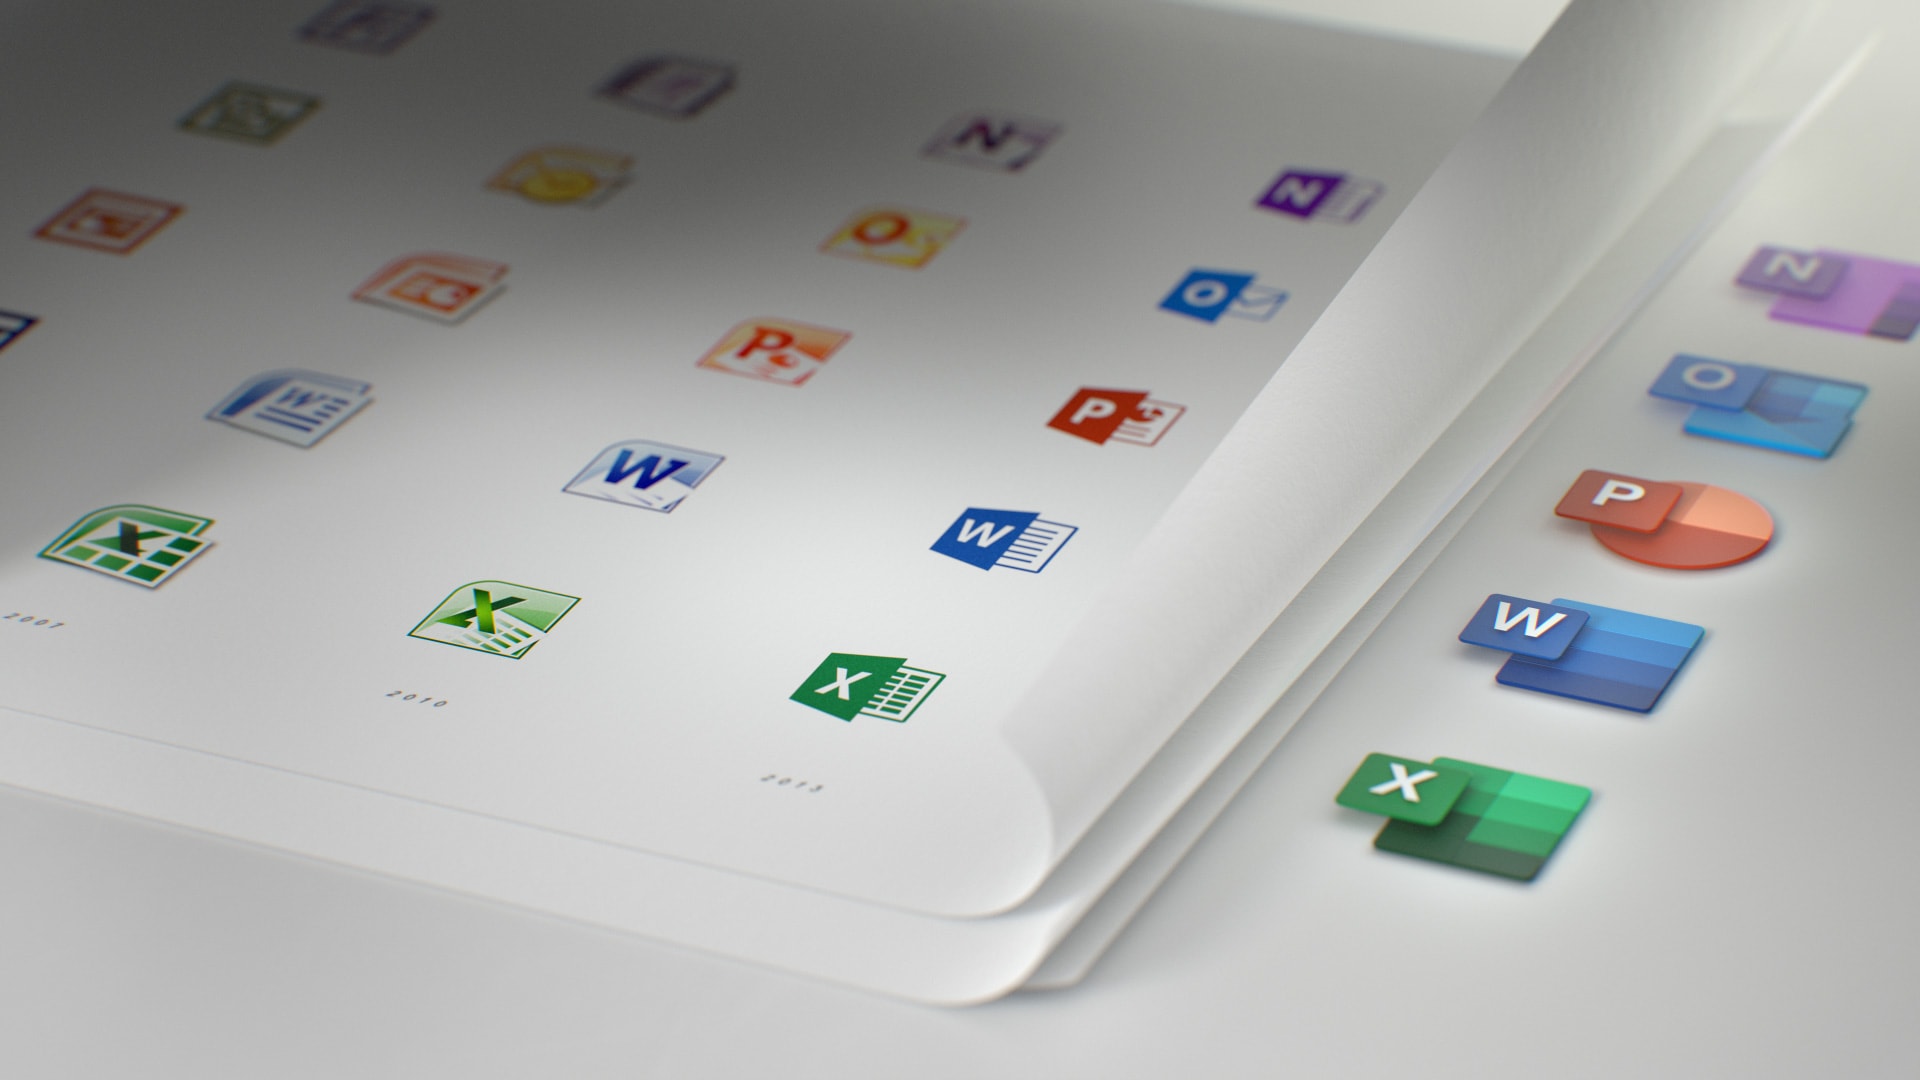 Microsoft Redesigned The Office App Icons